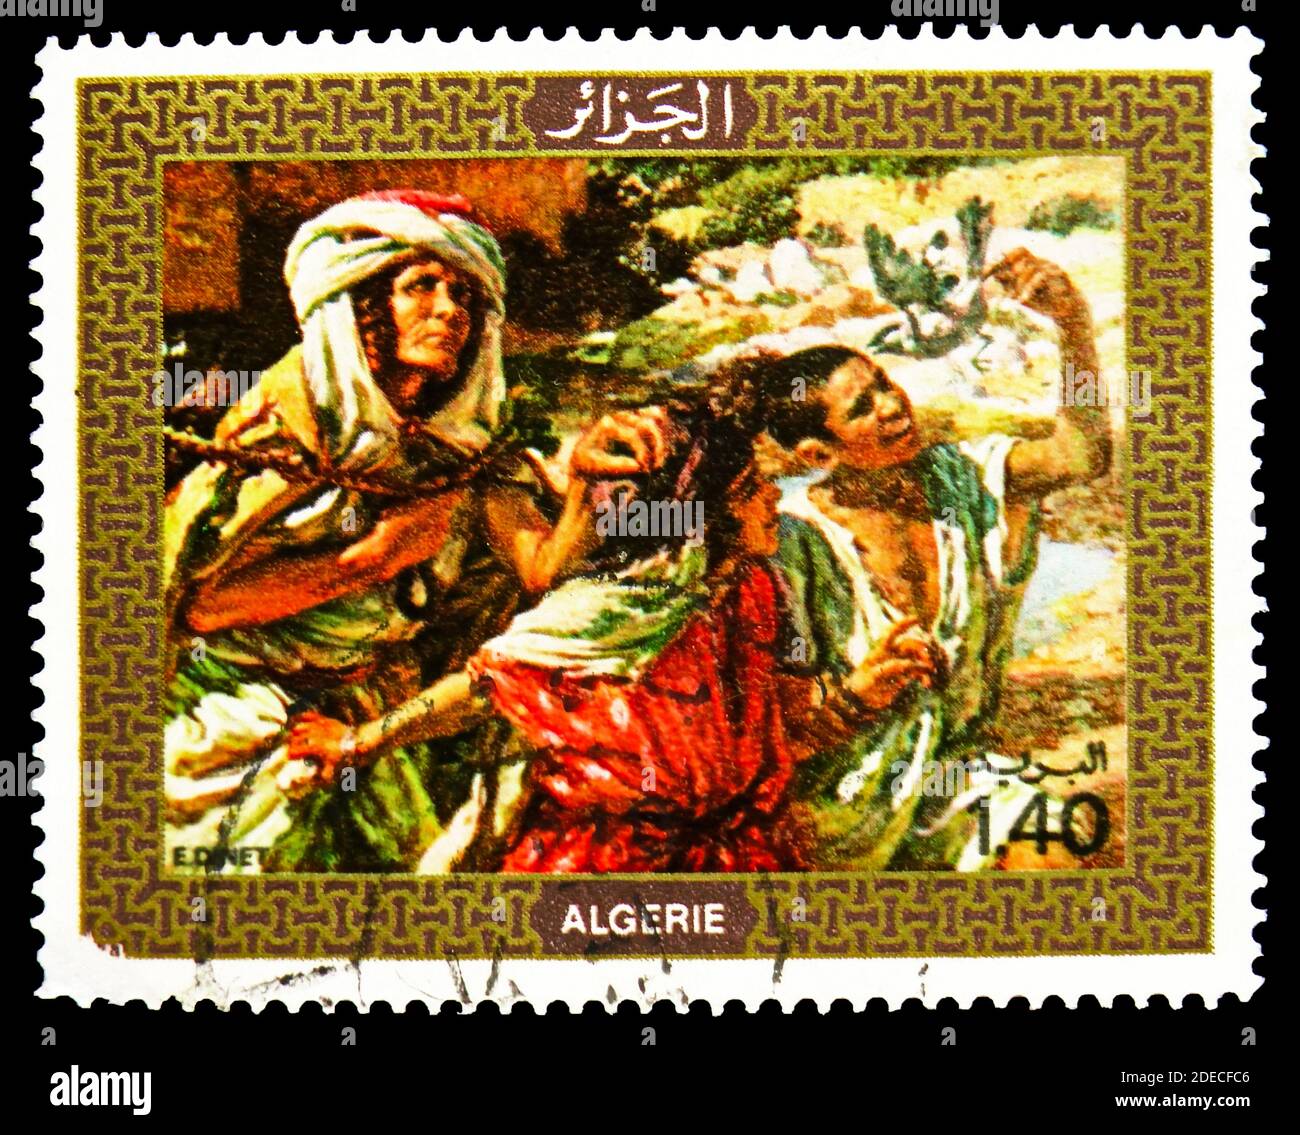 MOSCOW, RUSSIA - OCTOBER 17, 2020: Postage stamp printed in Algeria shows Painting: The Blind, Rehabilitation of the Blind serie, circa 1976 Stock Photo